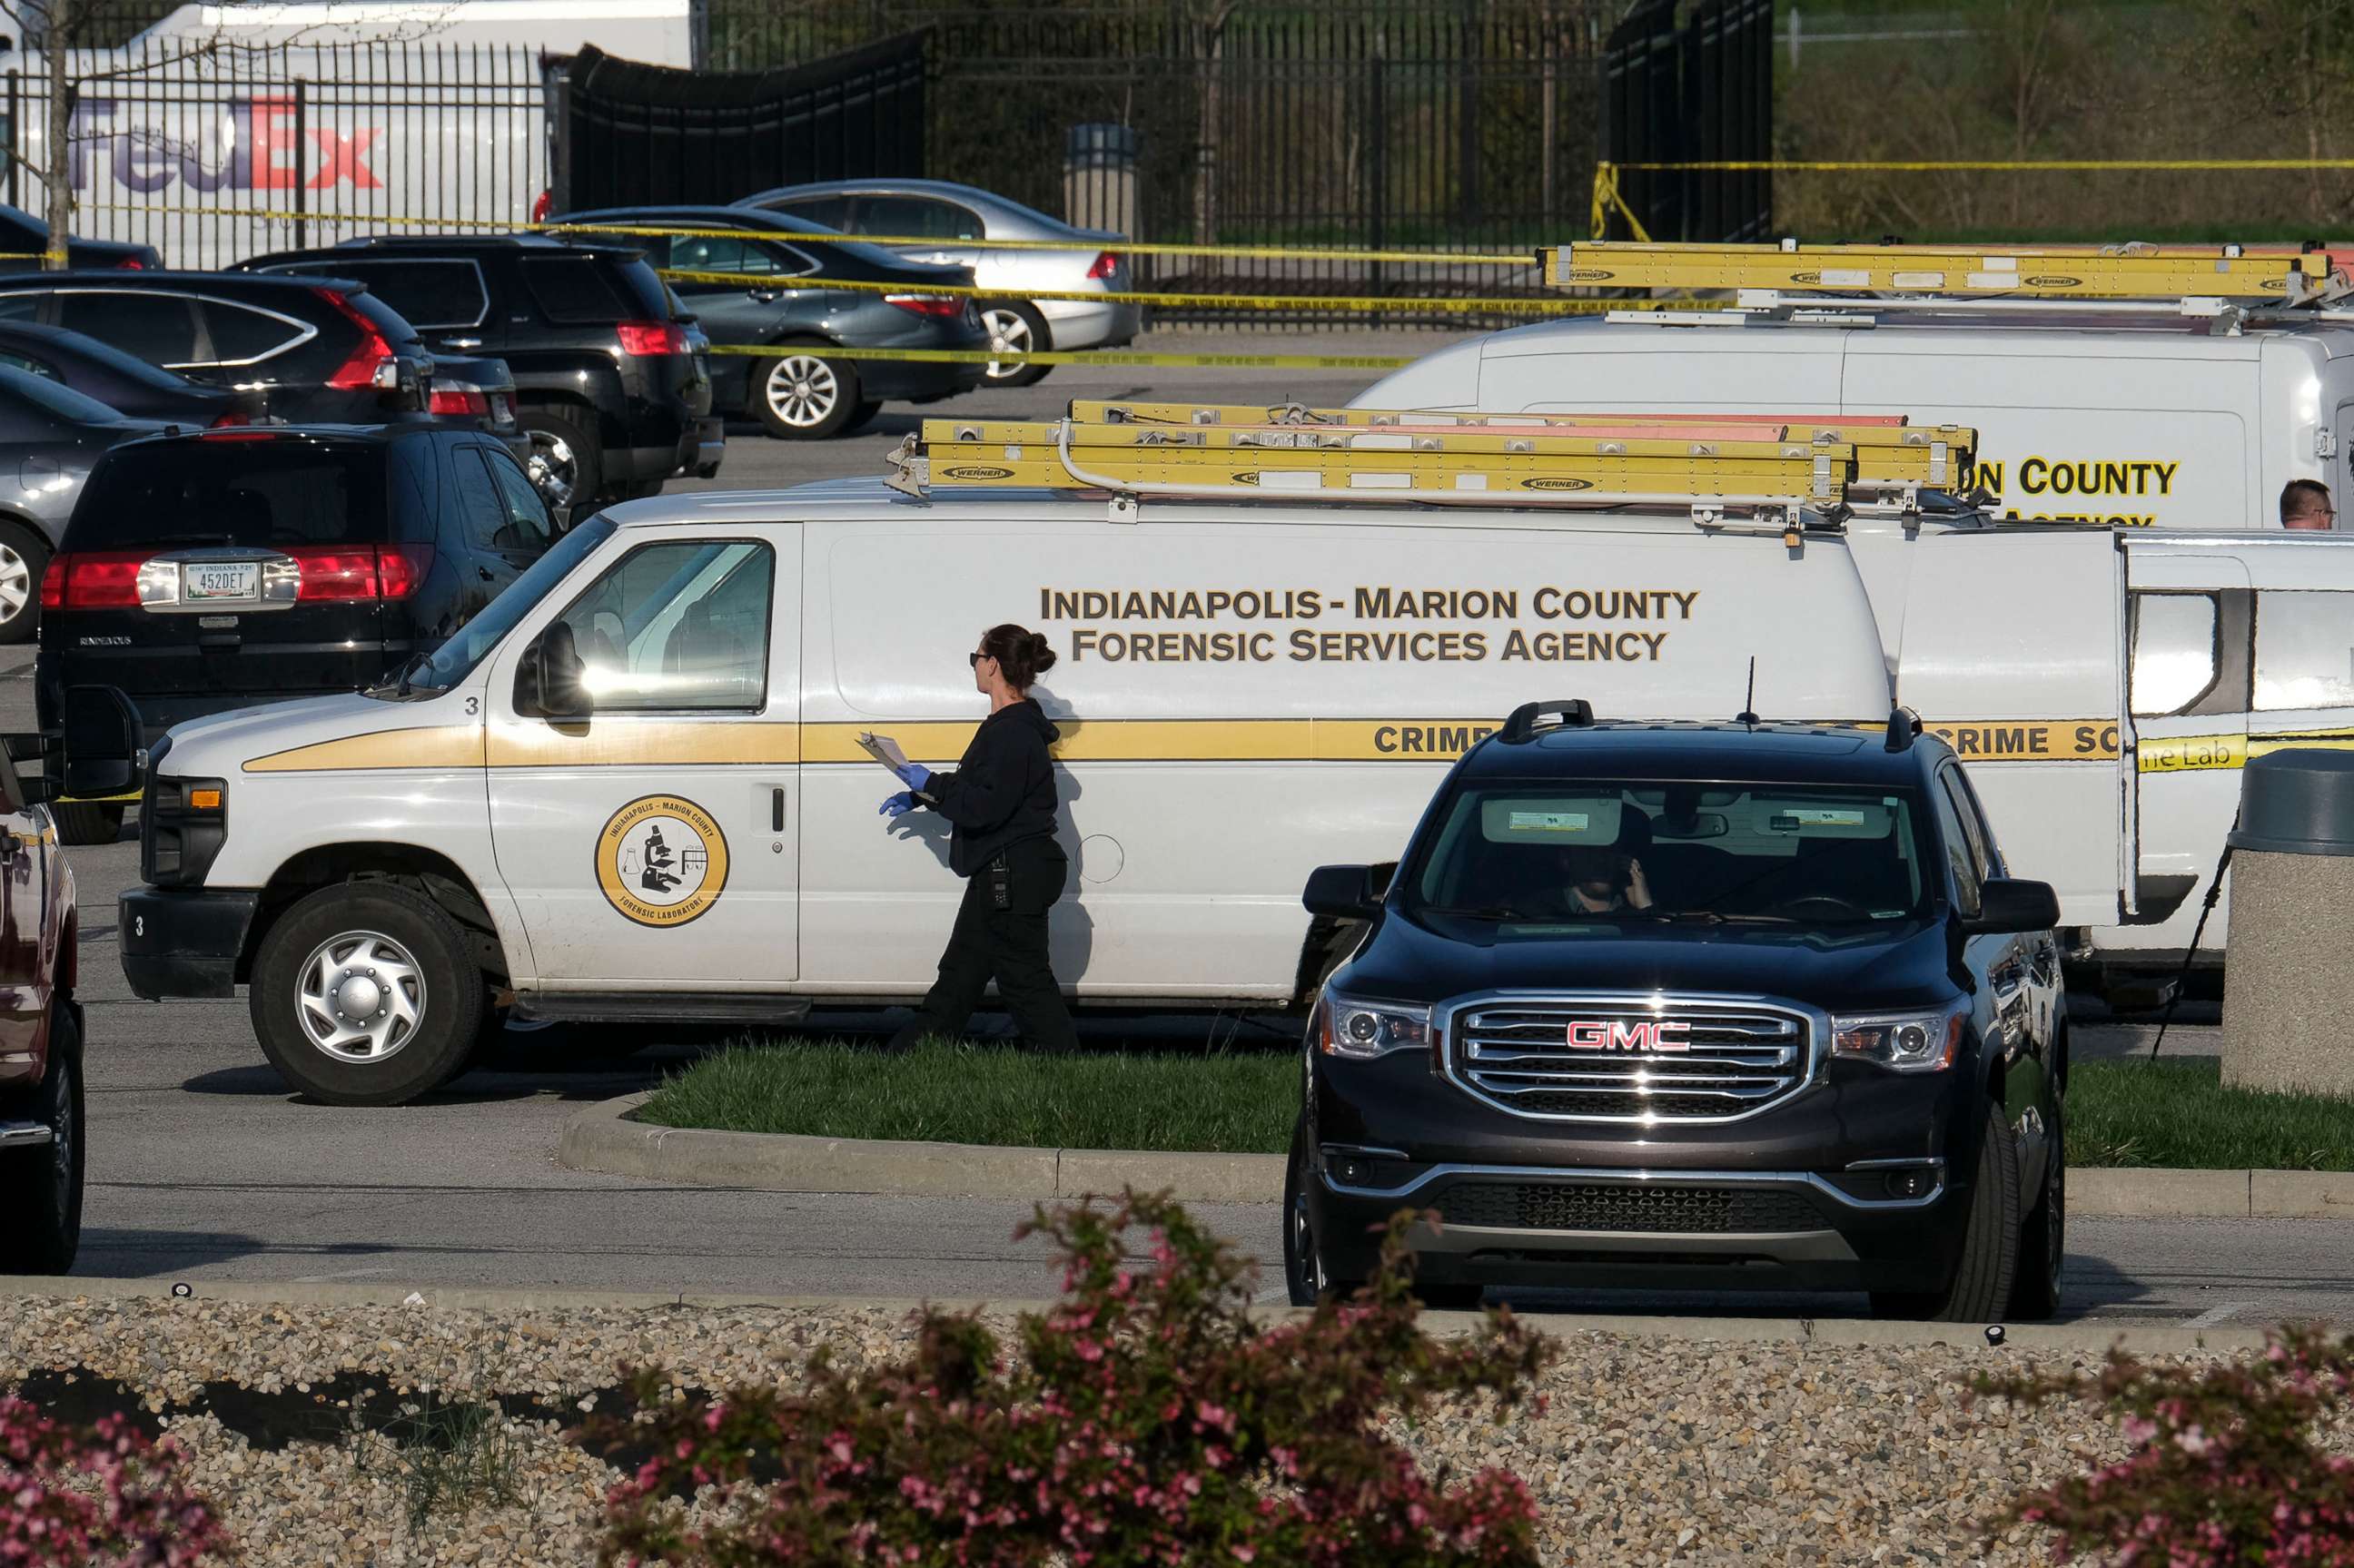 PHOTO: Marion County Forensic Services vehicles are parked at a FedEx facility in Indianapolis, April 16, 2021.